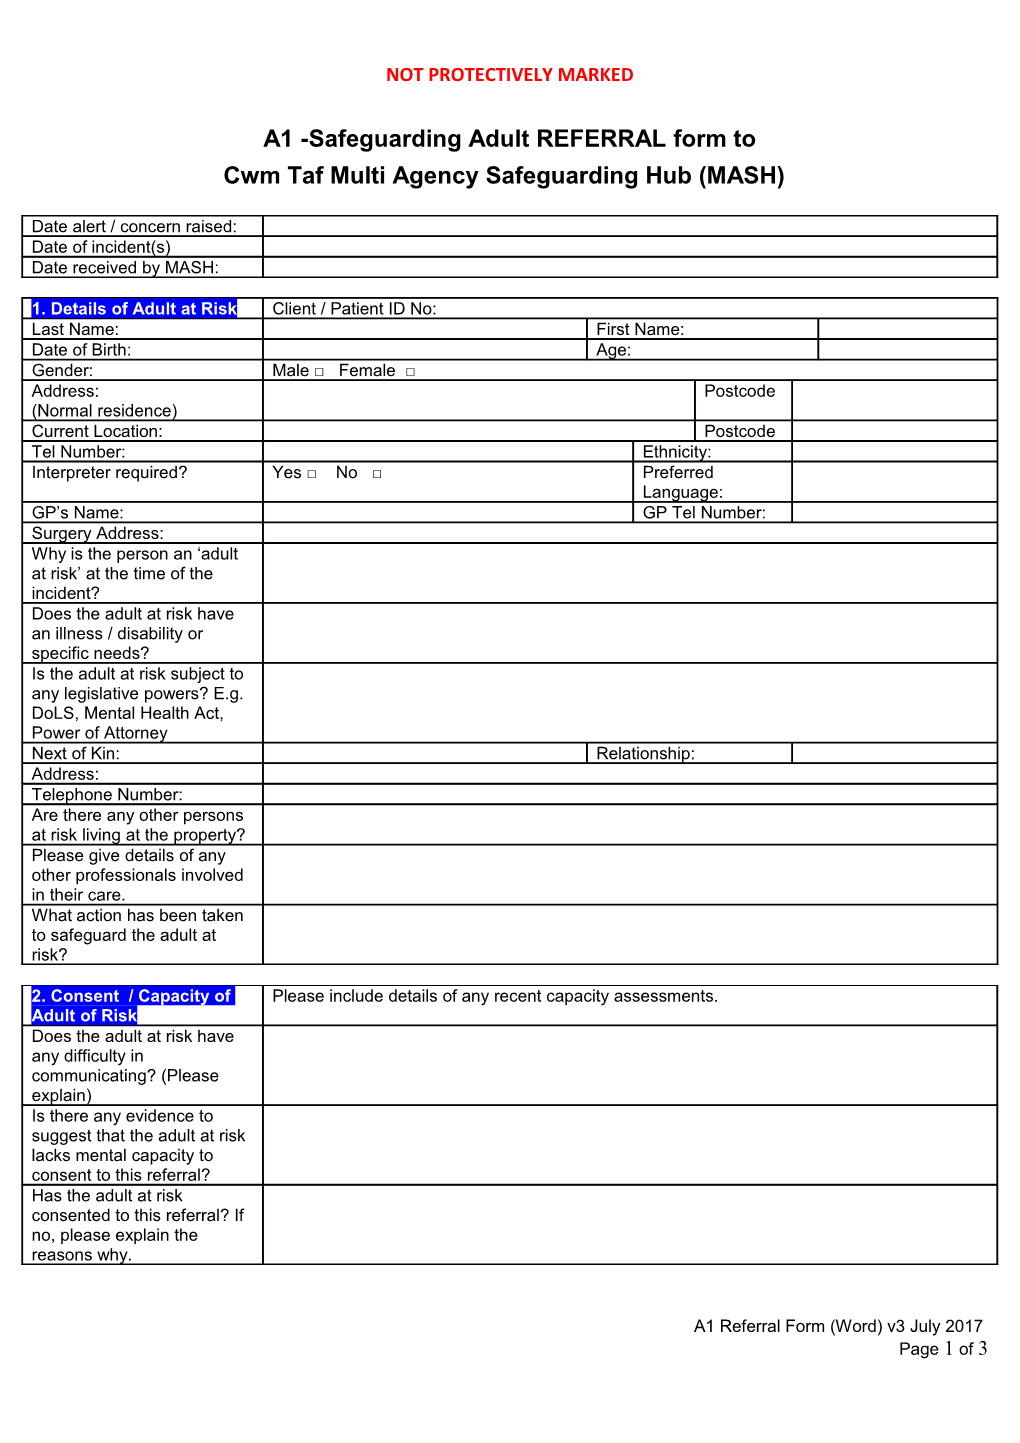 REFERRAL Form Tosafeguarding Adult REFERRAL Form To